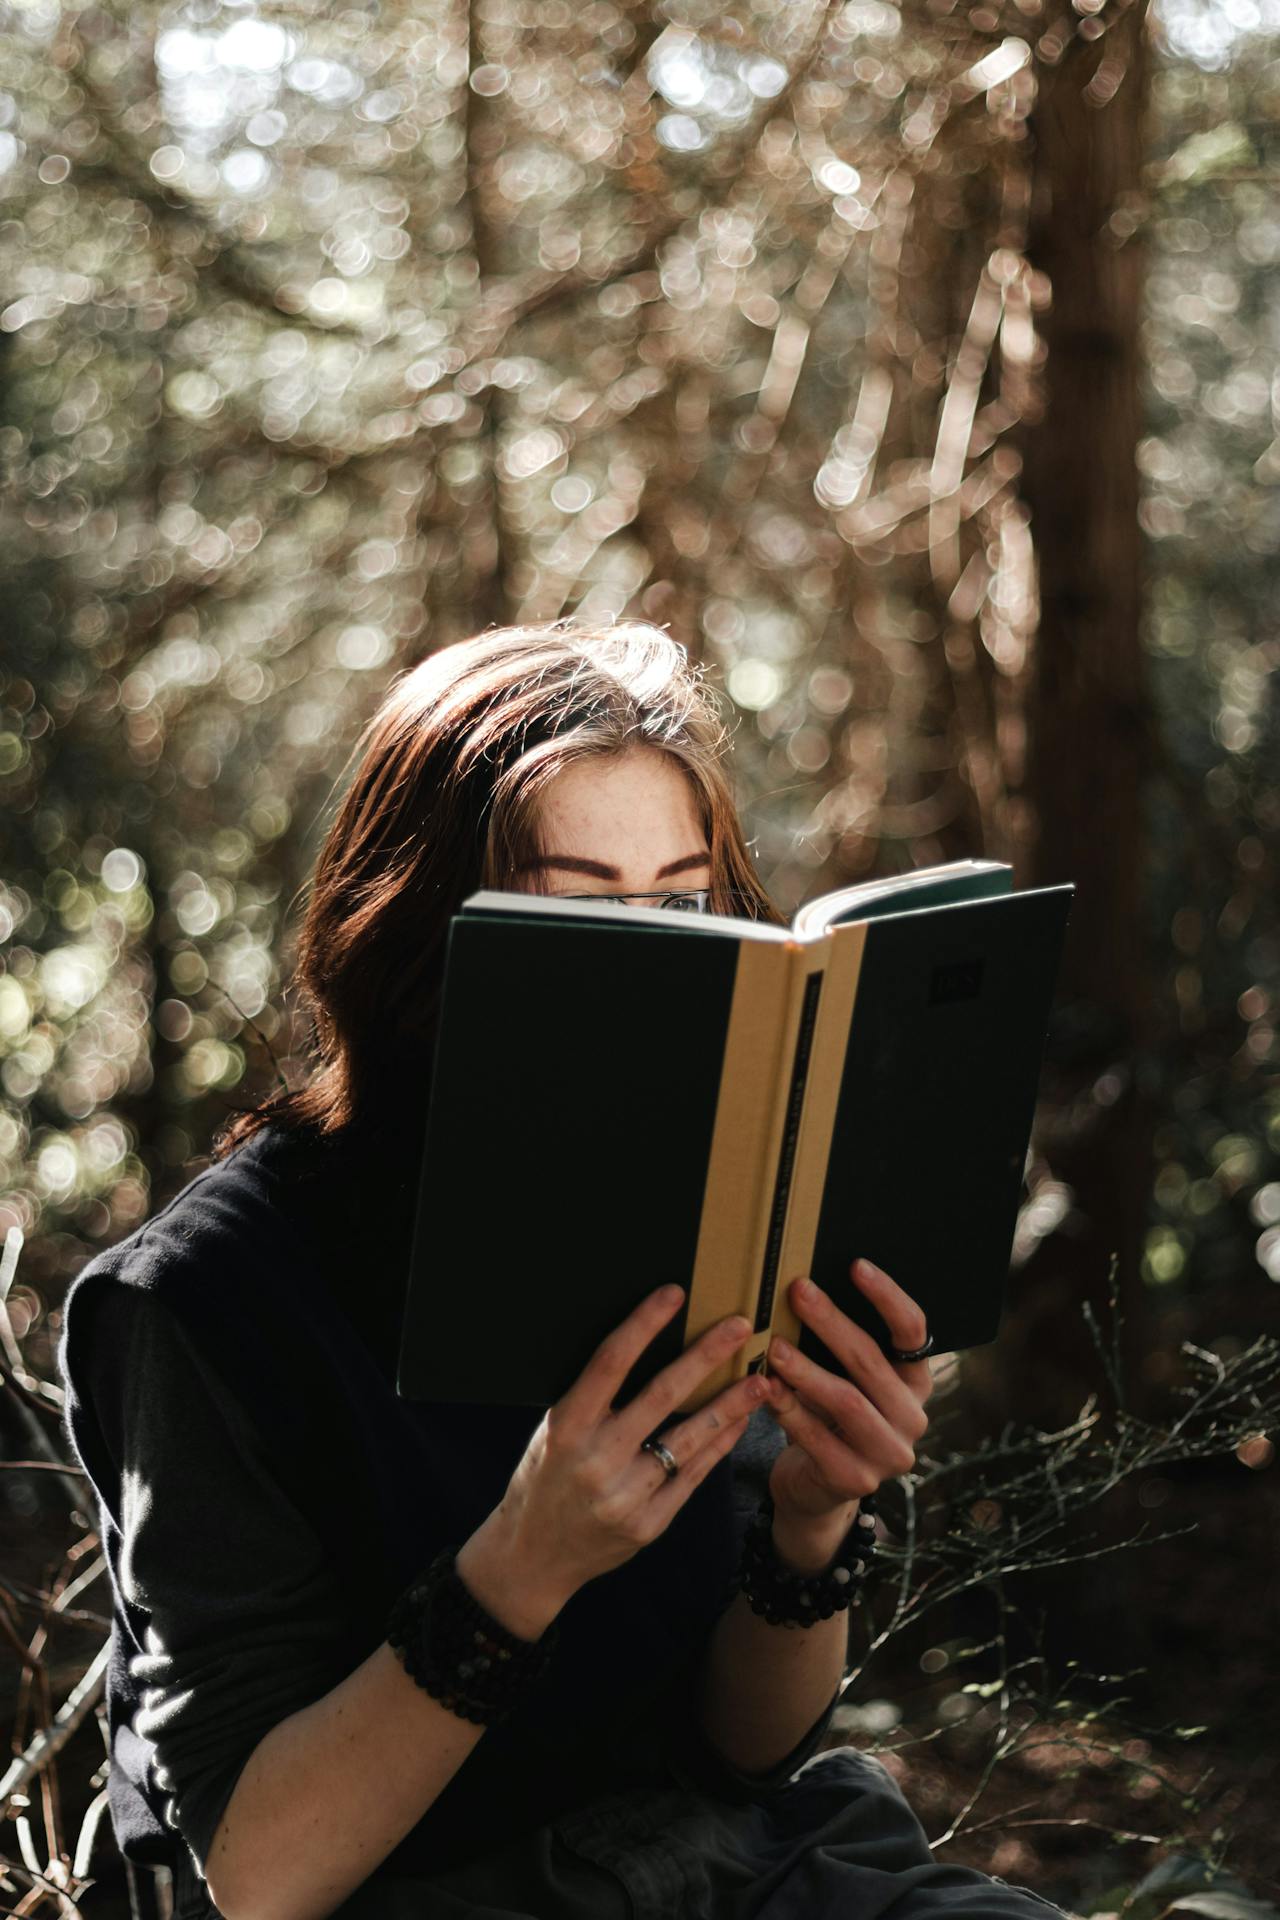 Photo by Aedrian: https://www.pexels.com/photo/photo-of-a-woman-with-a-ring-holding-a-black-book-11482152/